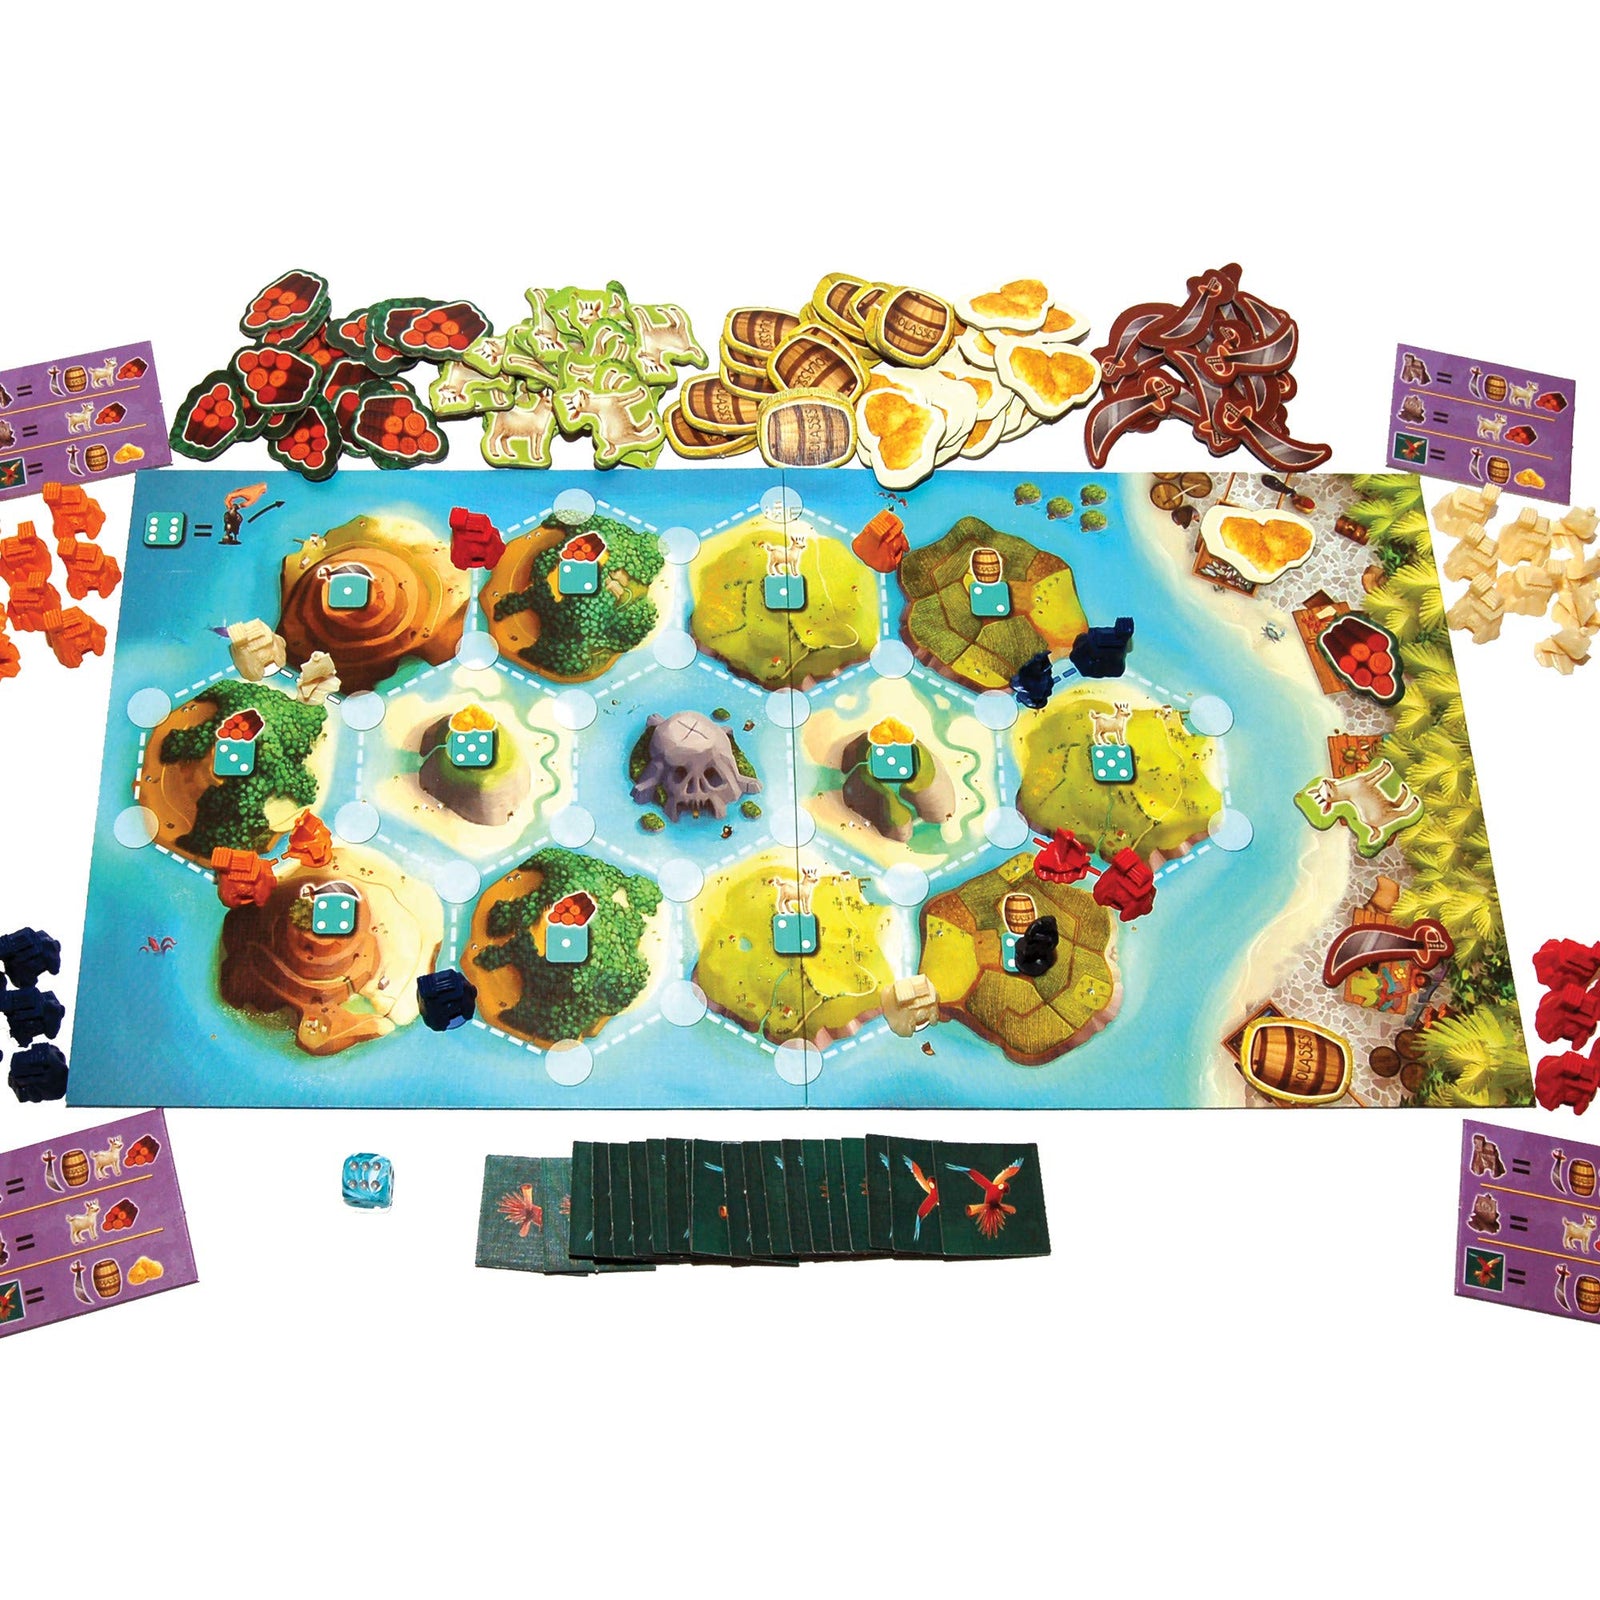 CATAN Junior Board Game | Board Game for Kids | Strategy Game for Kids | Family Board Game | Adventure Game for Kids | Ages 6+ | For 2 to 4 players | Average Playtime 30 minutes | Made by Catan Studio